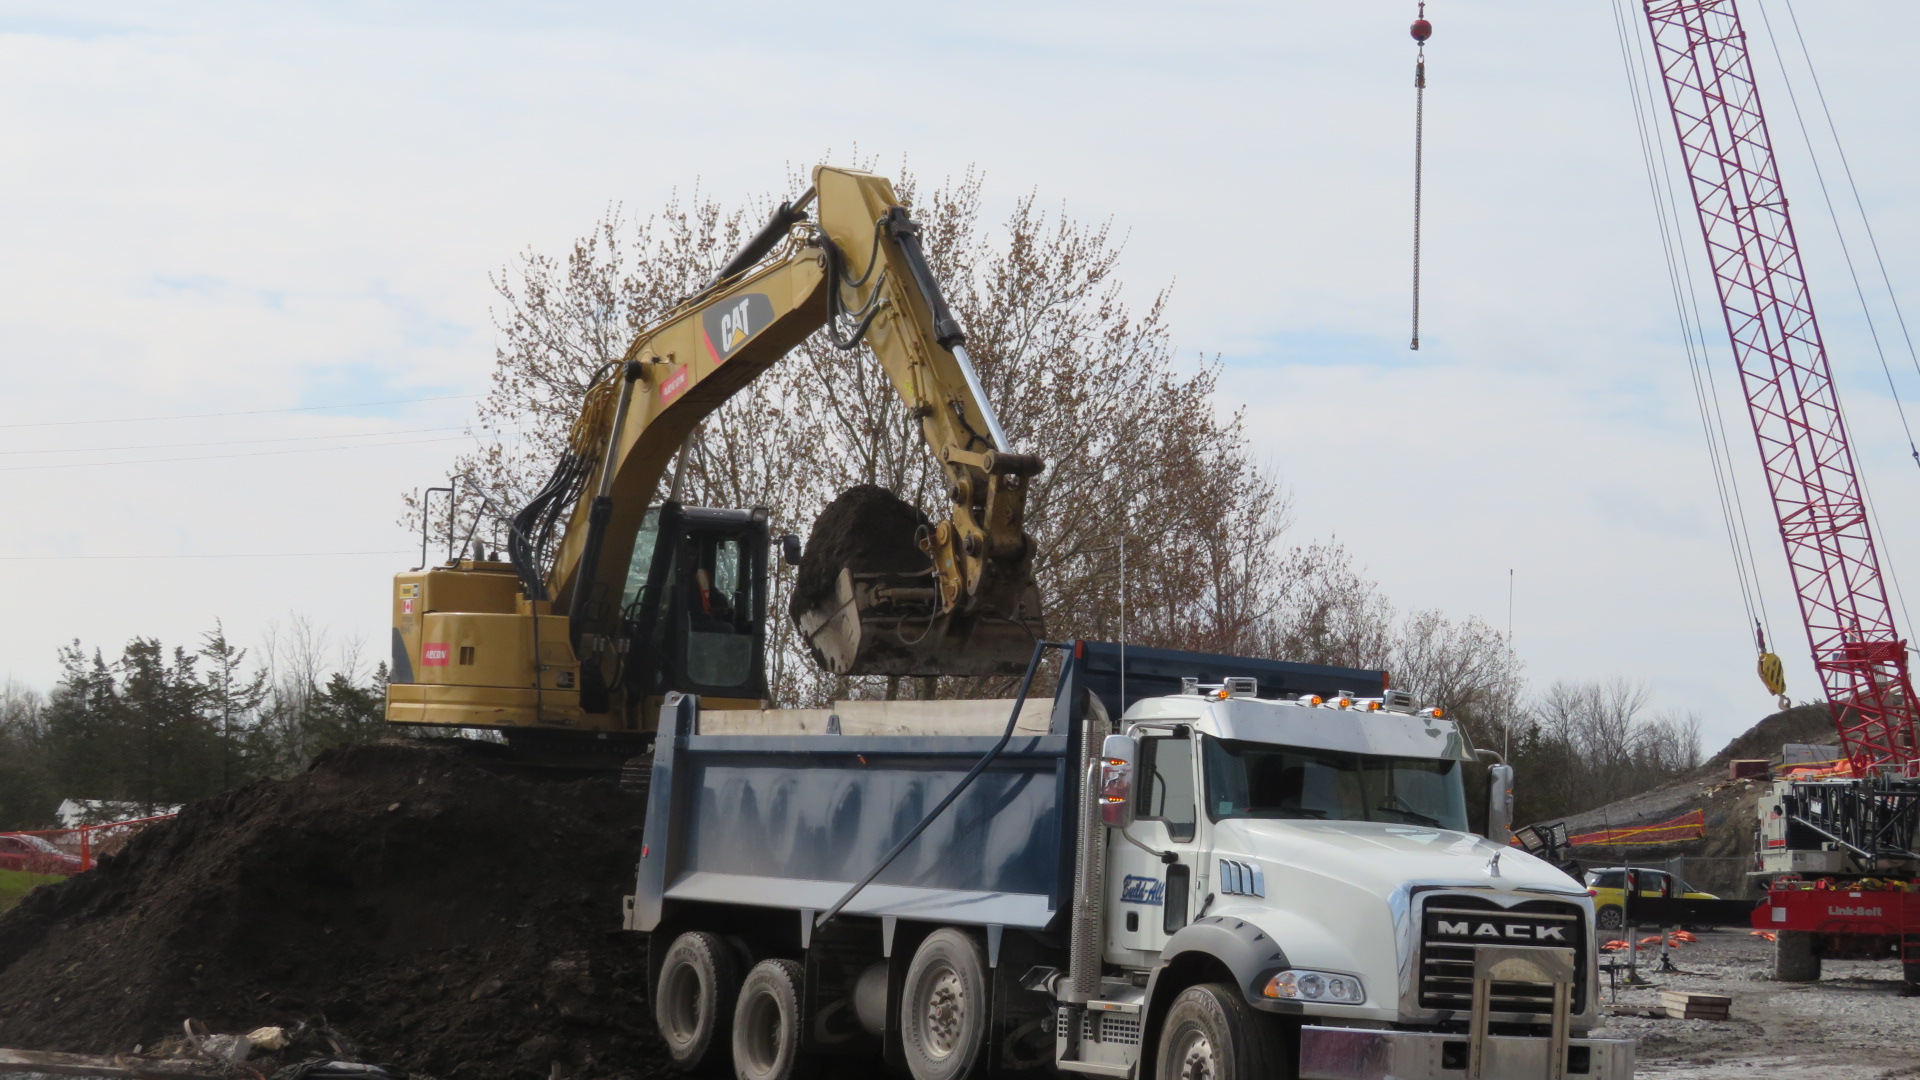 Excavator removing soil to the truck